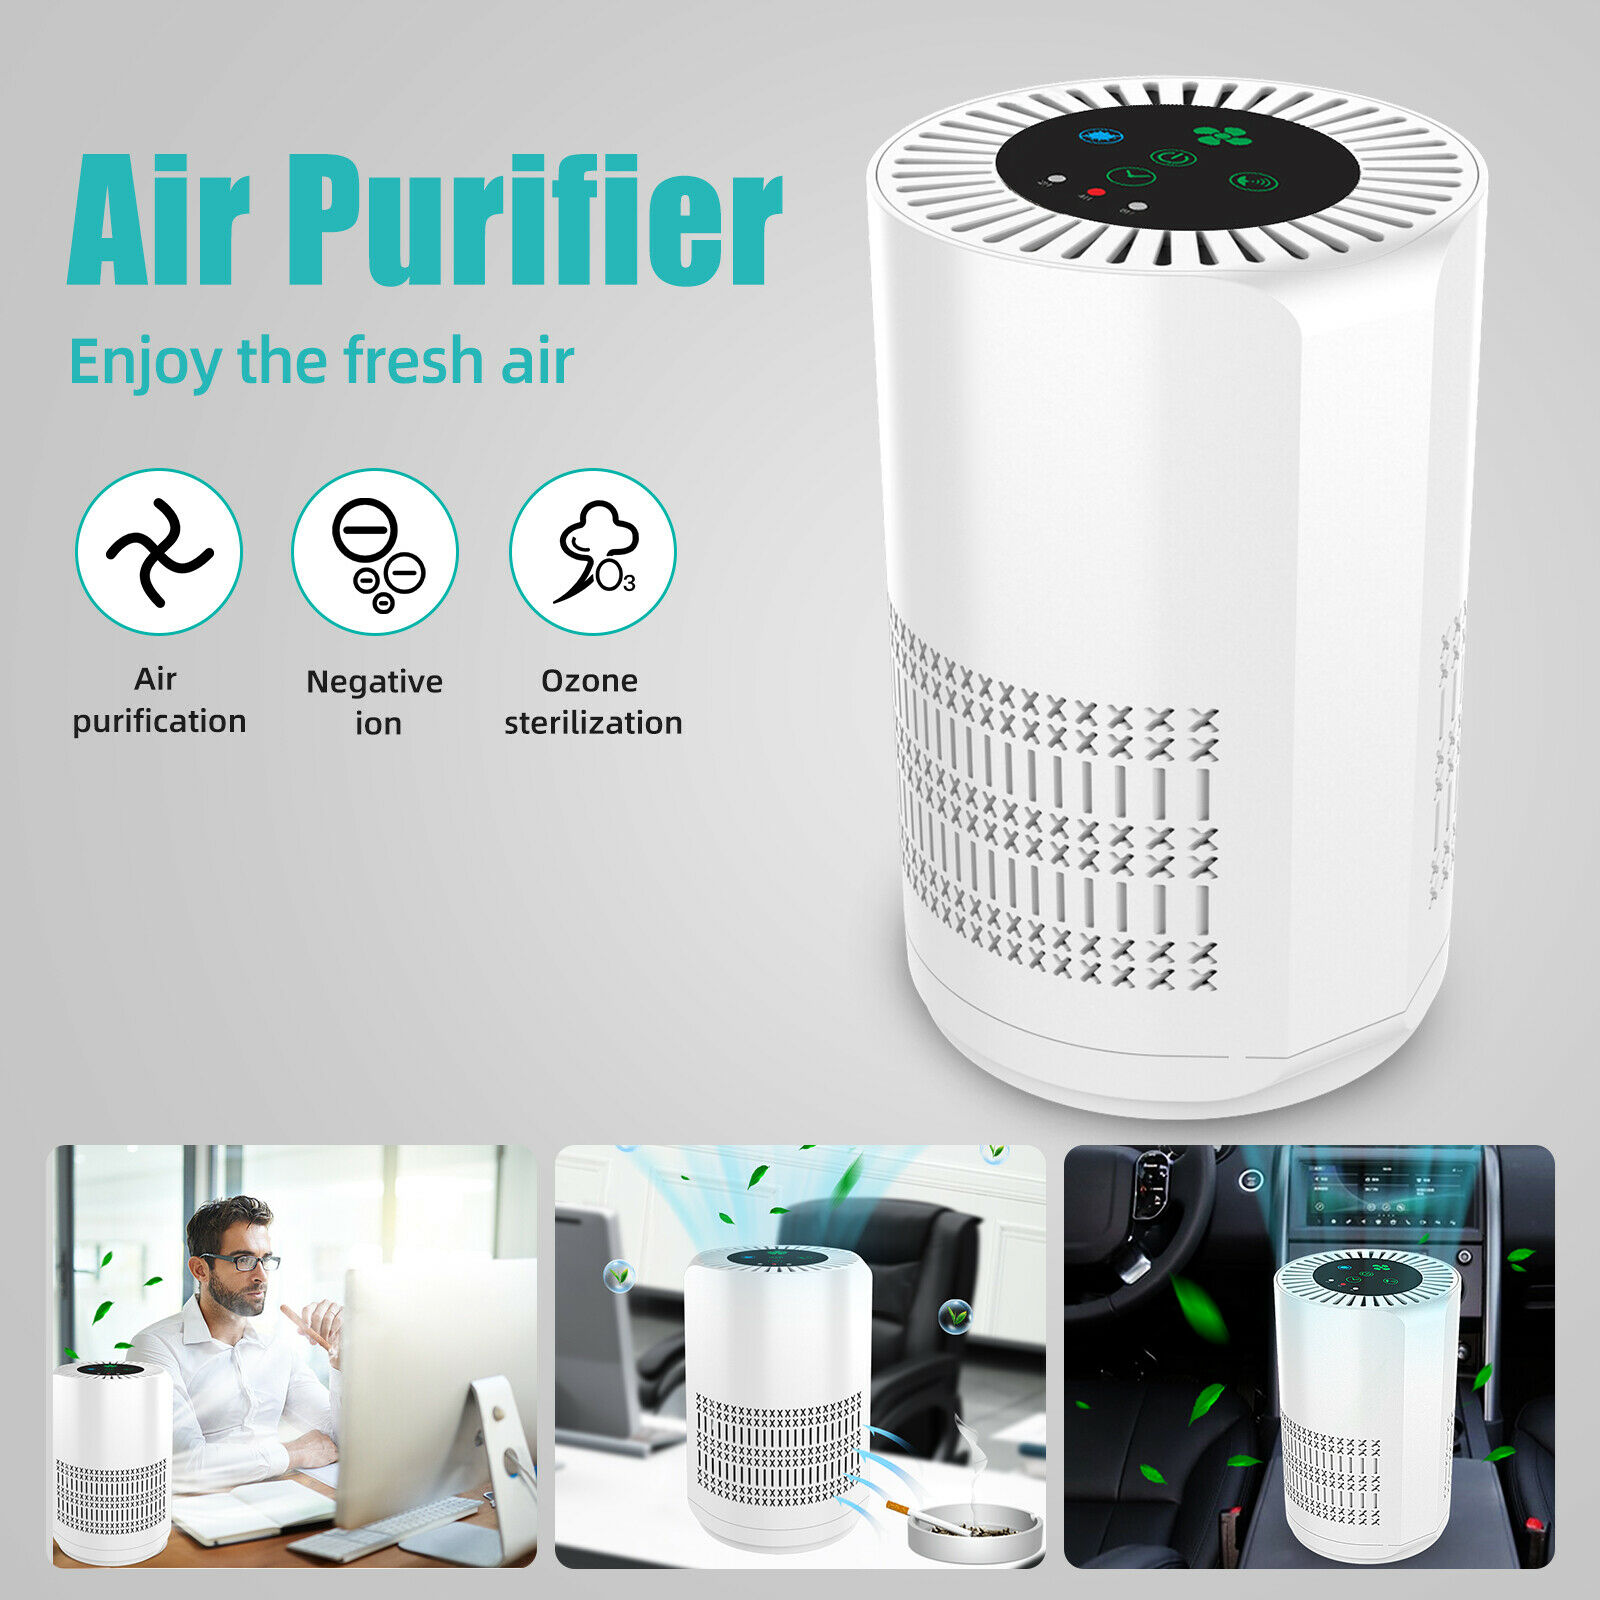 Air Purifier Negative Ion Air Cleaner Allergies and Pets Smoke,Mold,Pollen,Dust